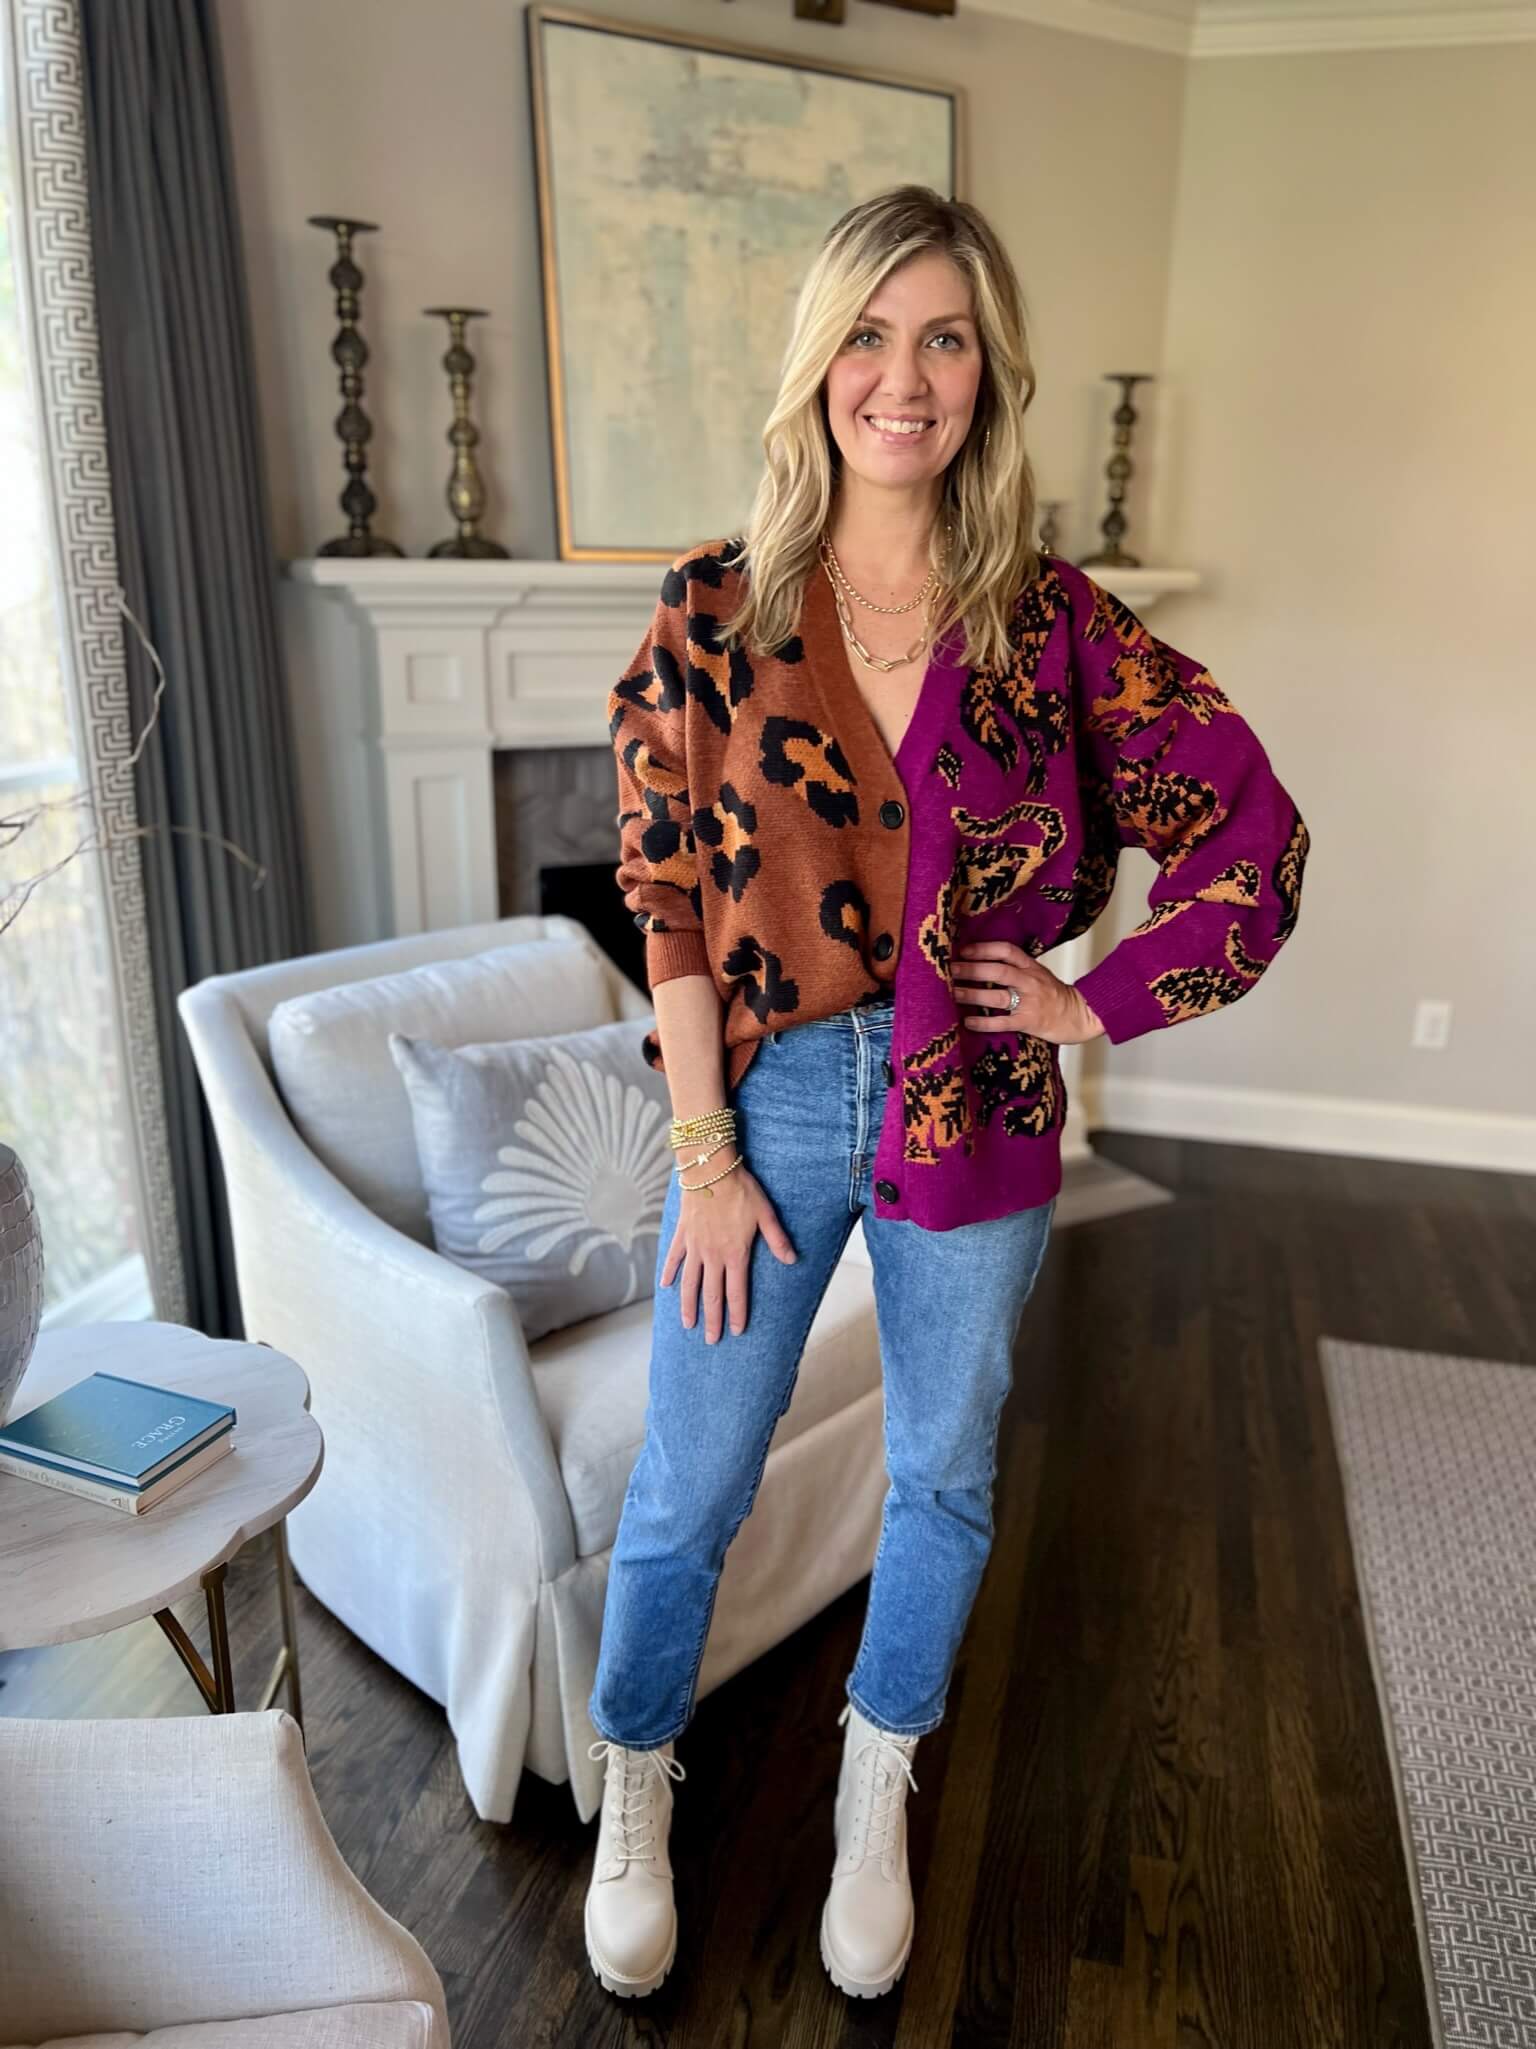 How To Wear Our Winter Capsule Wardrobe – Part 2 Printed Cardigan & Dark Wash Jeans & Combat Boots